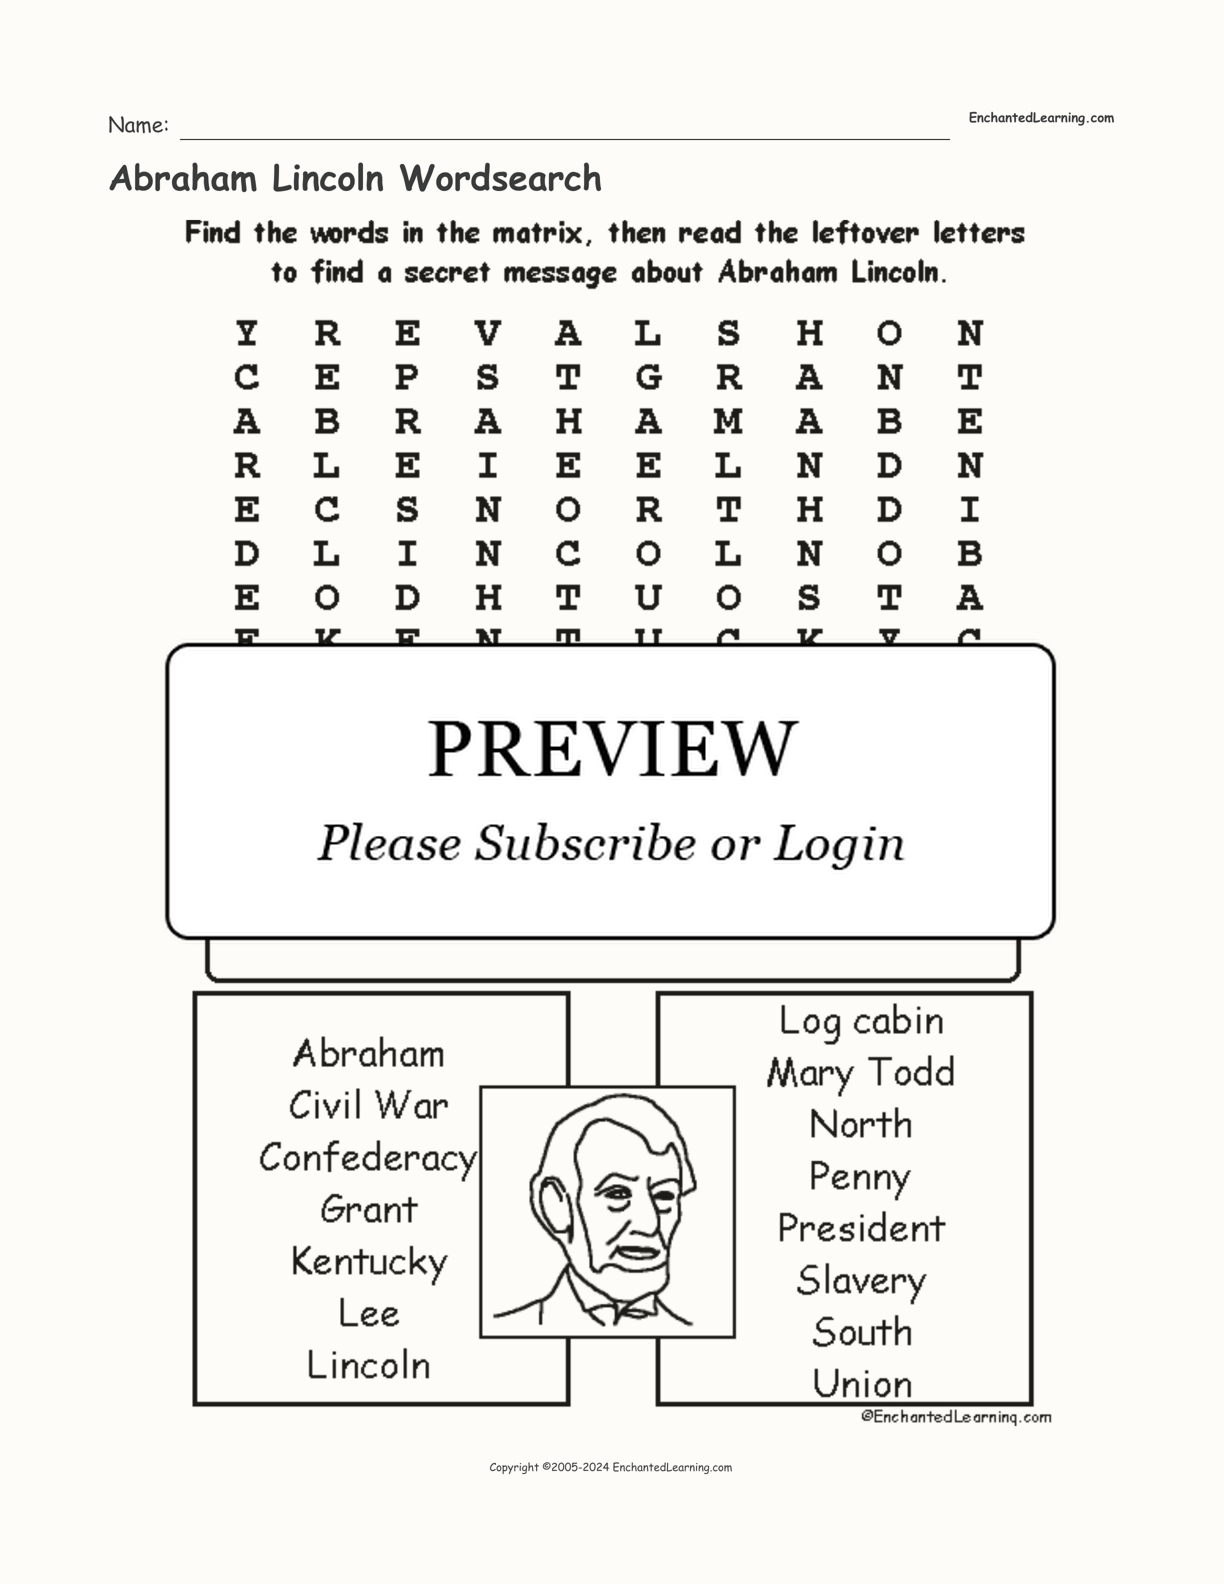 Abraham Lincoln Wordsearch interactive worksheet page 1